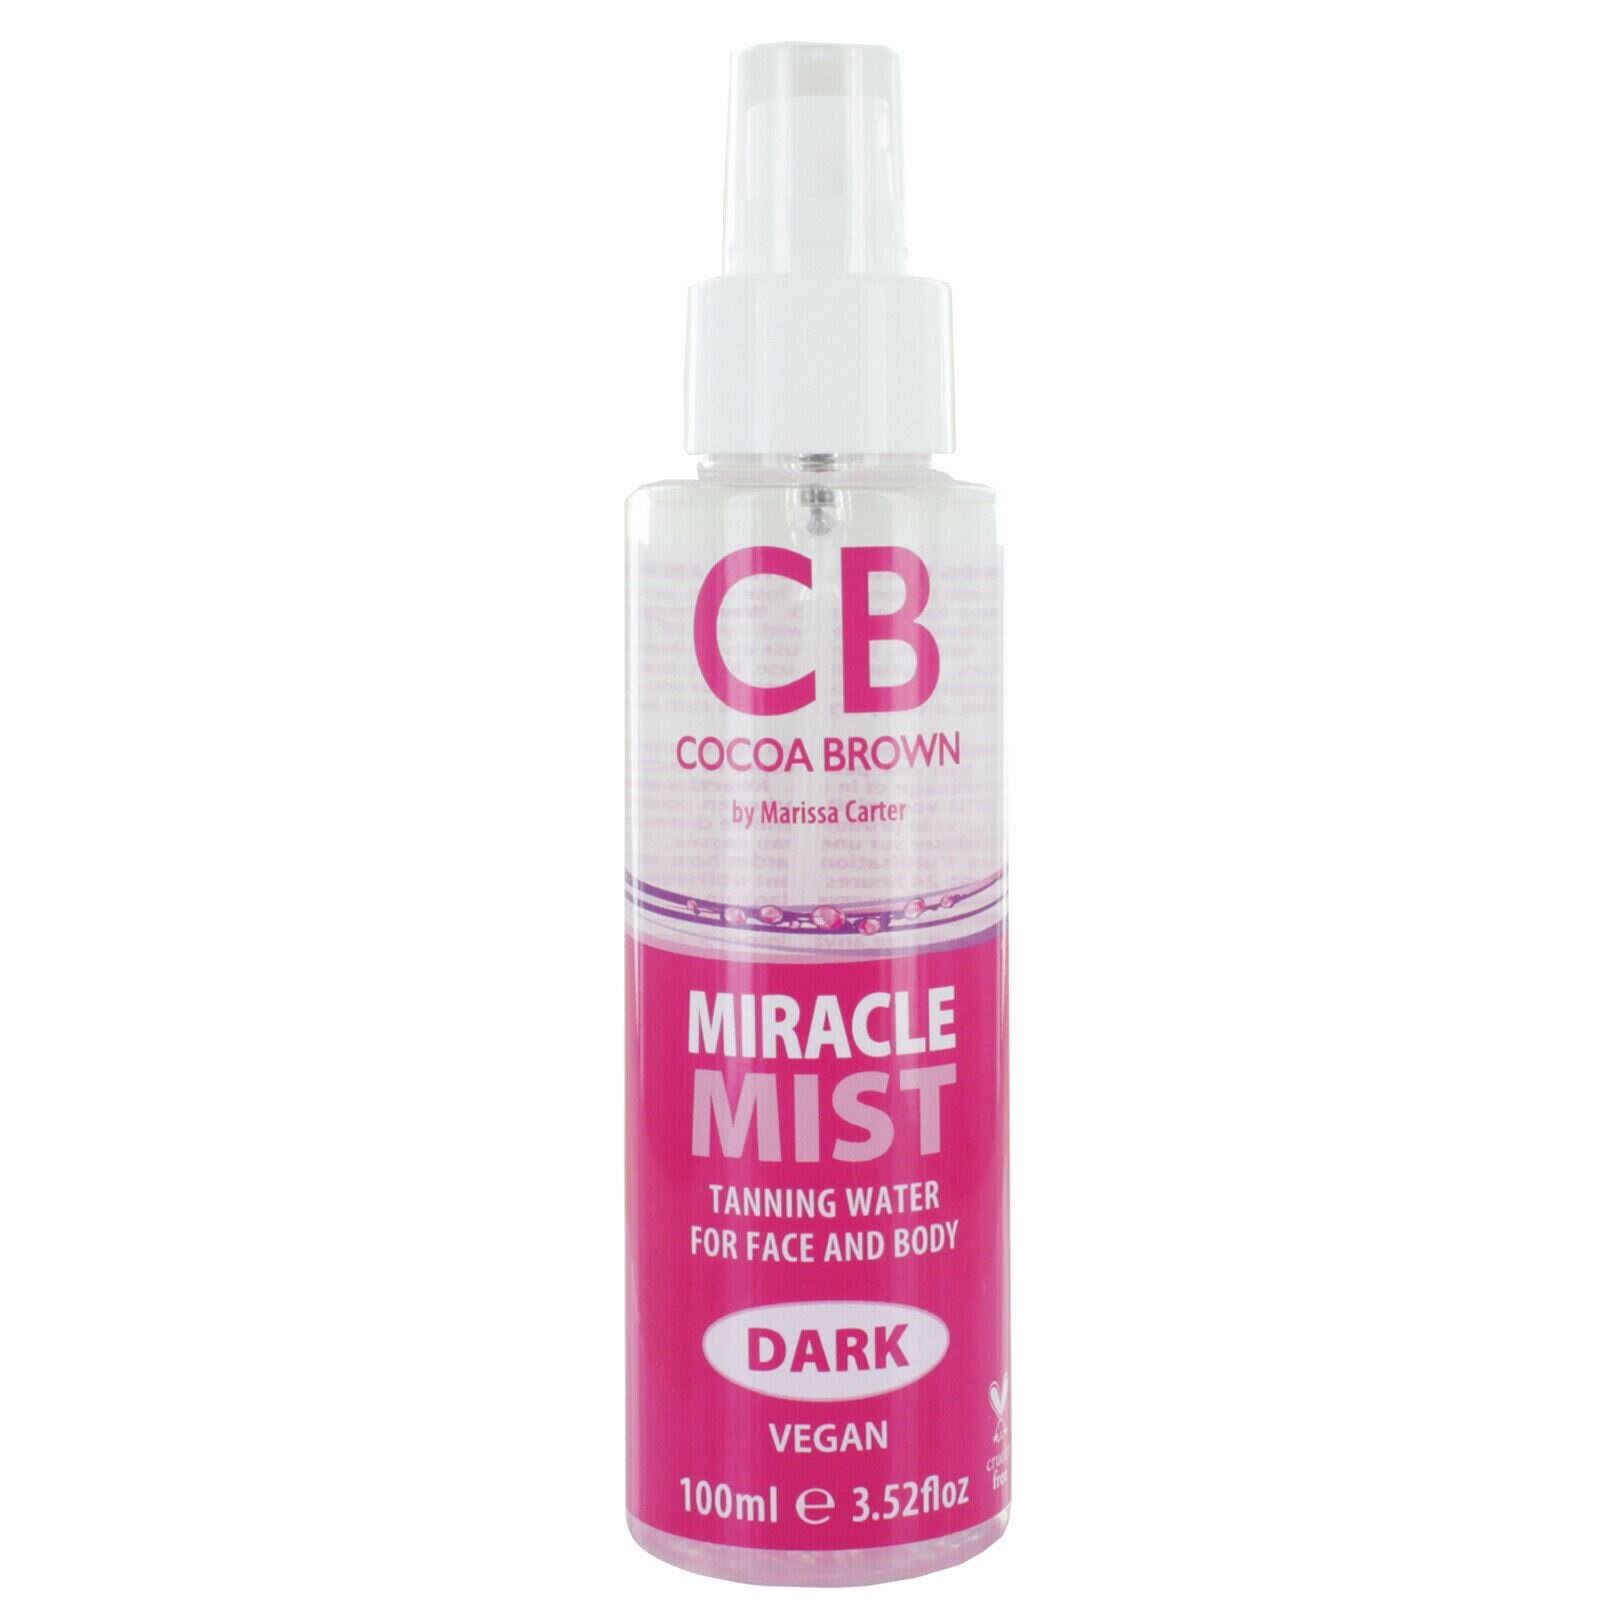 Cocoa Brown Miracle Mist Tanning Water - Dark (100ml)